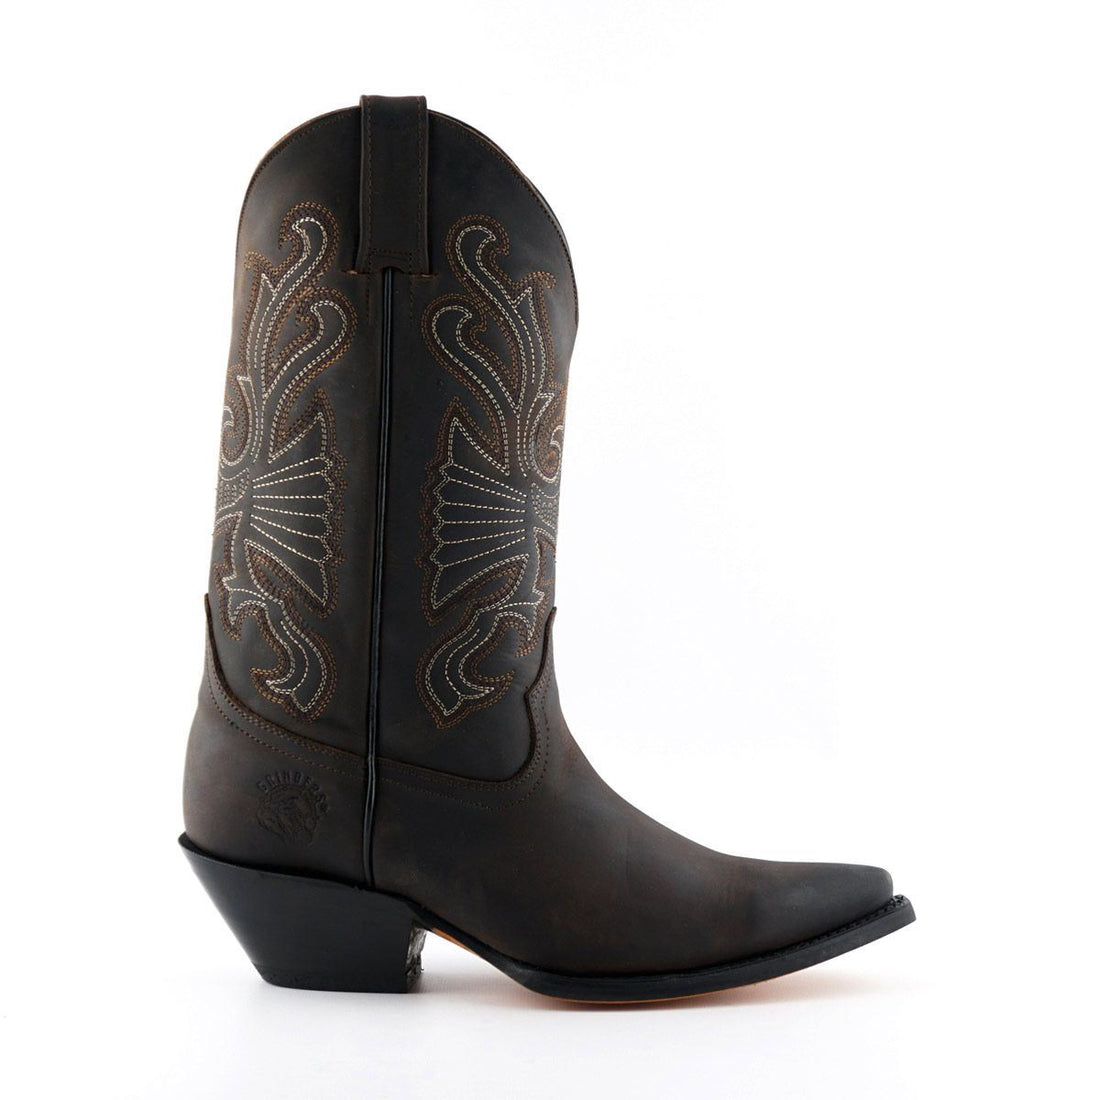 Grinders Brown Leather Western Cowboy Boots-Buffalo - Upperclass Fashions 